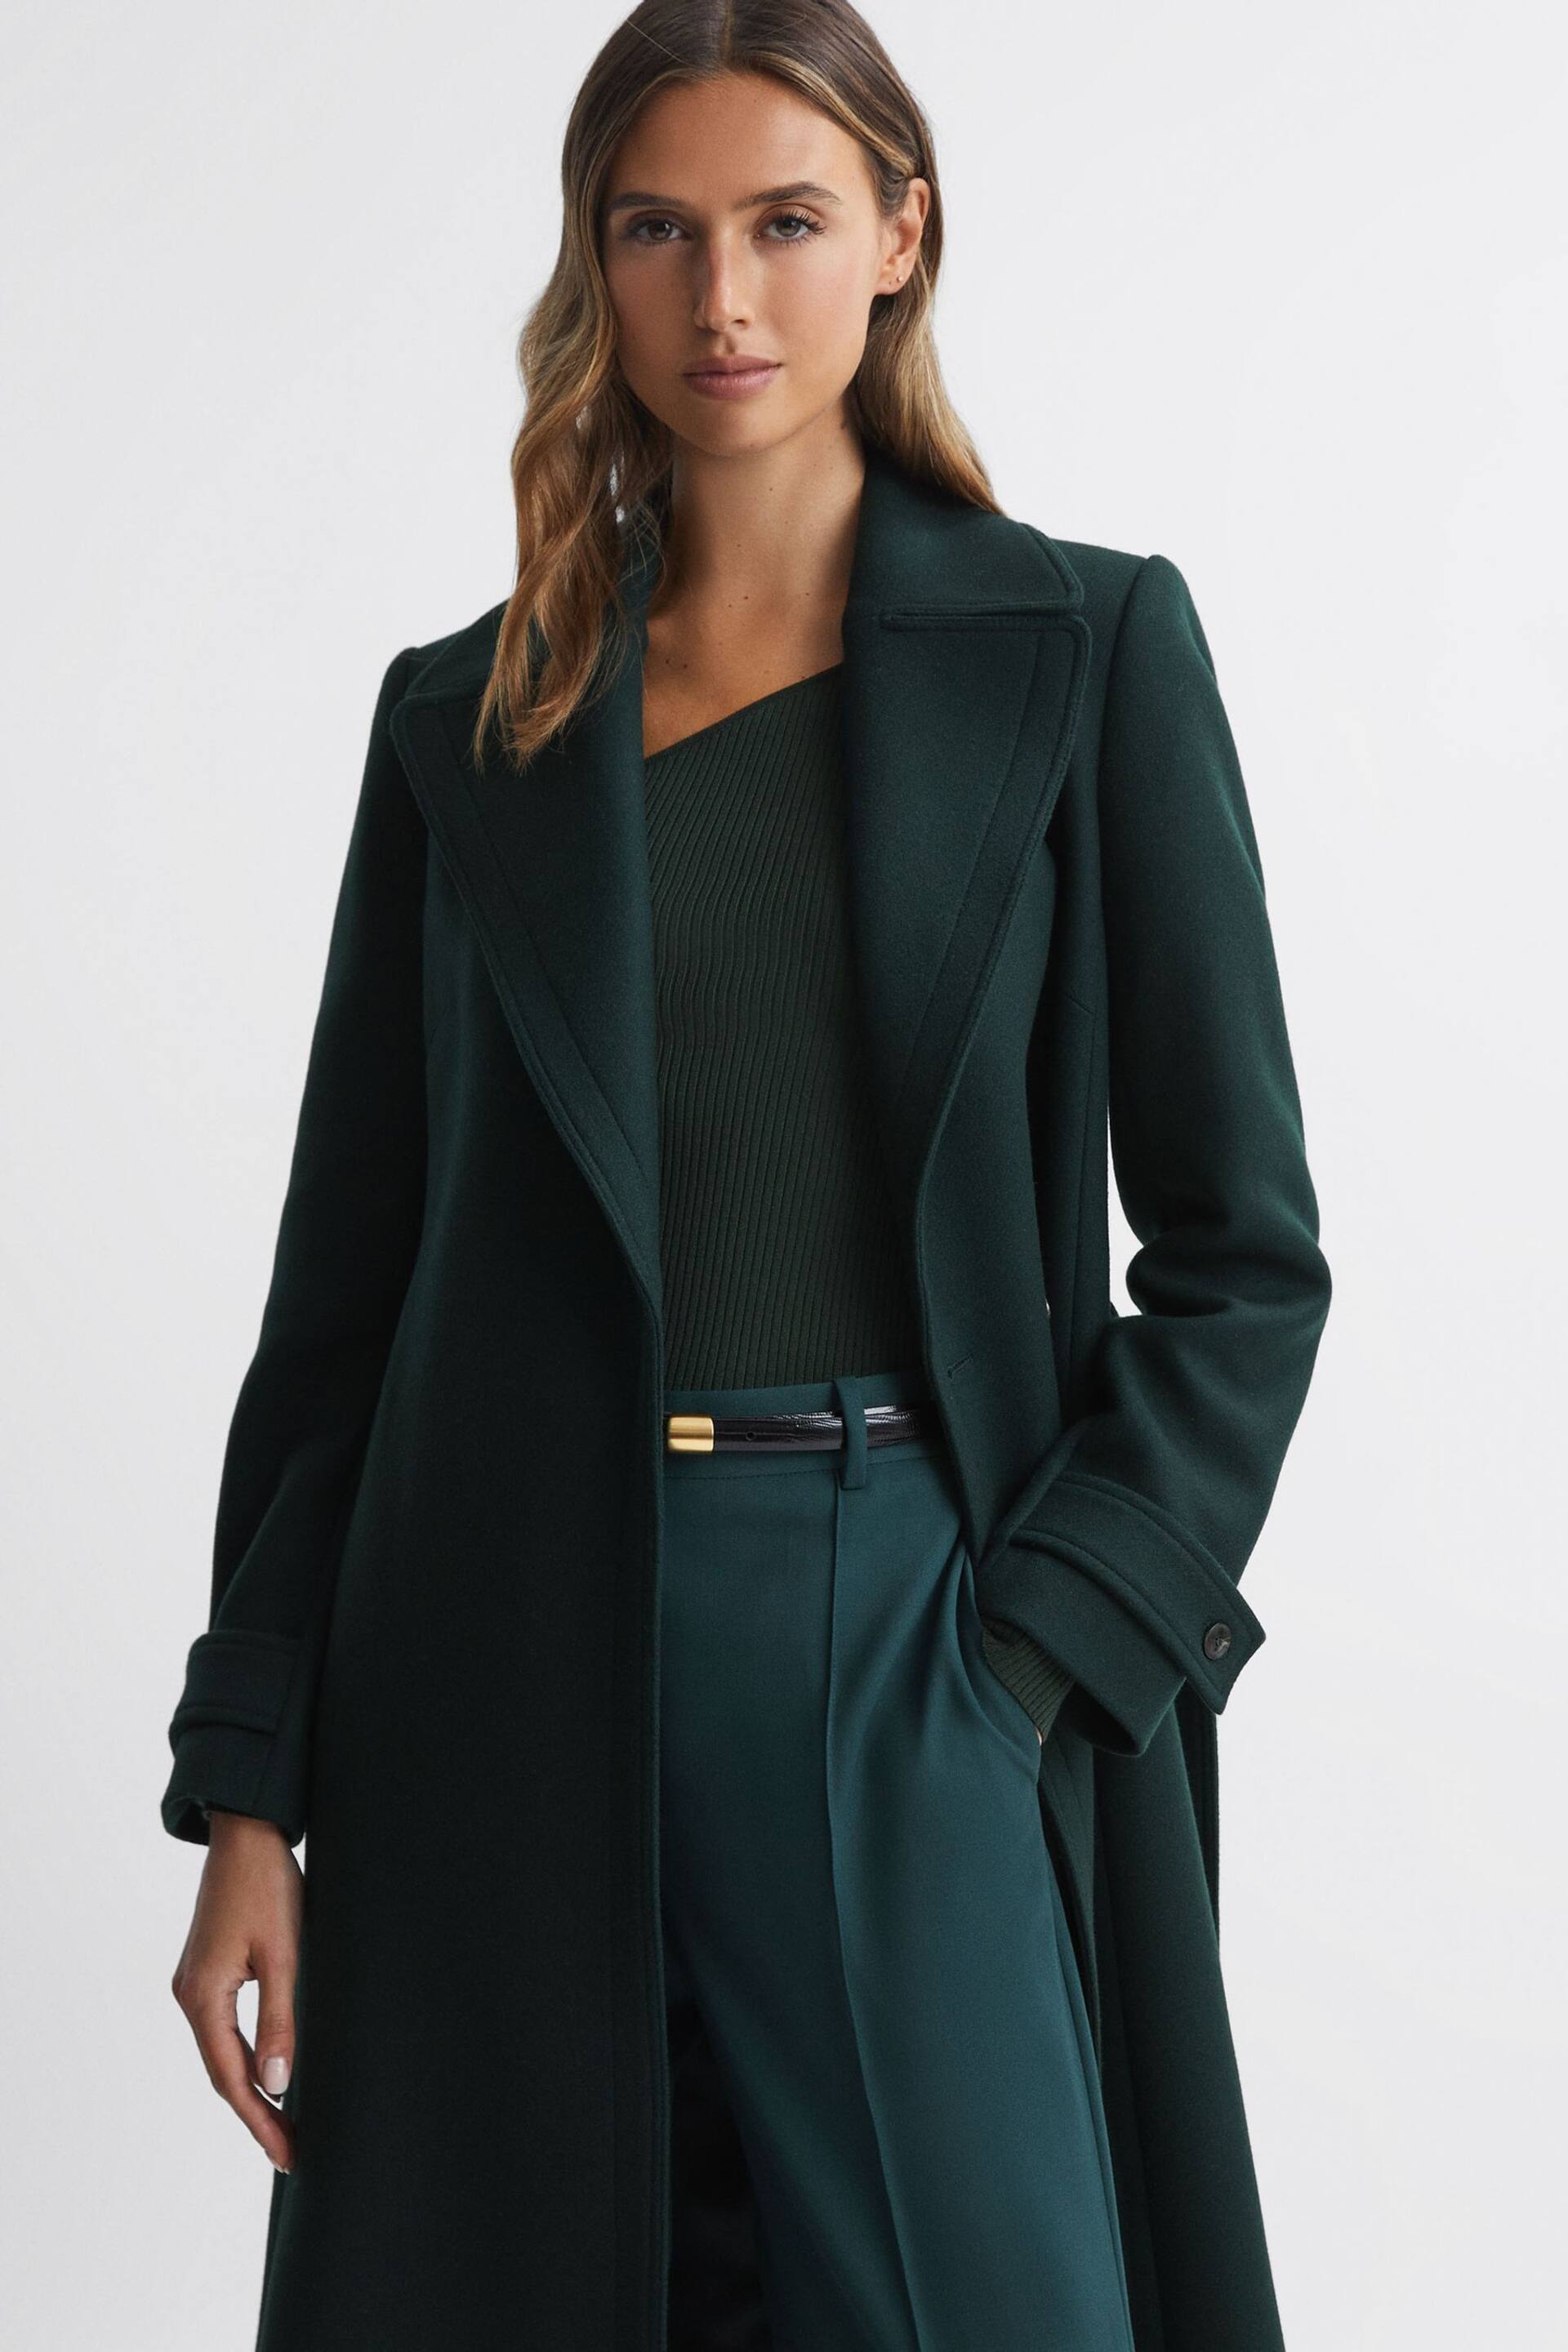 Reiss Green Tor Relaxed Wool Blend Belted Coat - Image 3 of 5